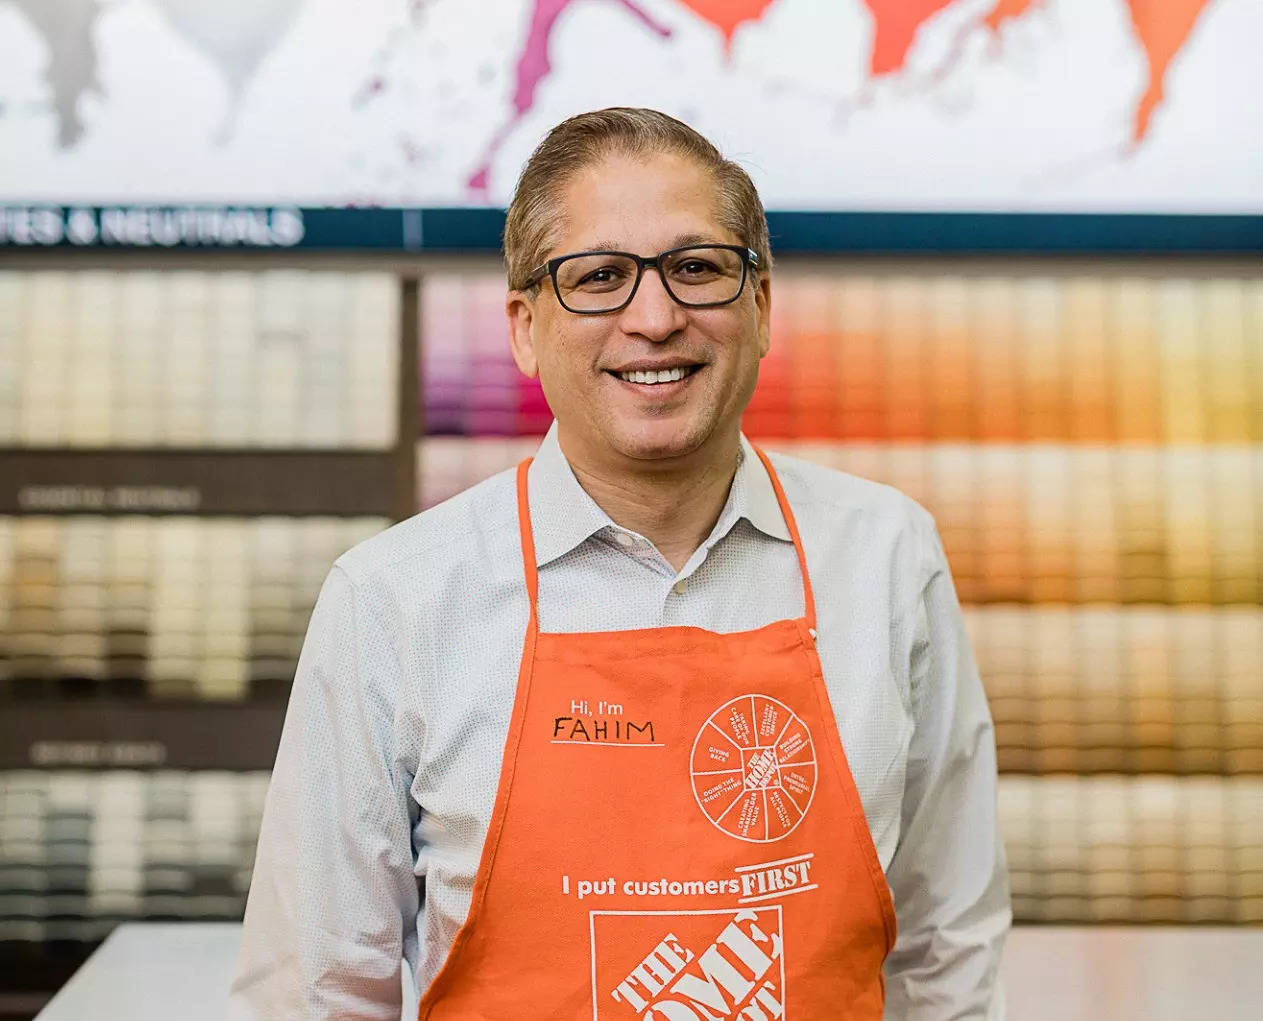 How The Home Depot Became the World's Largest Home-Improvement